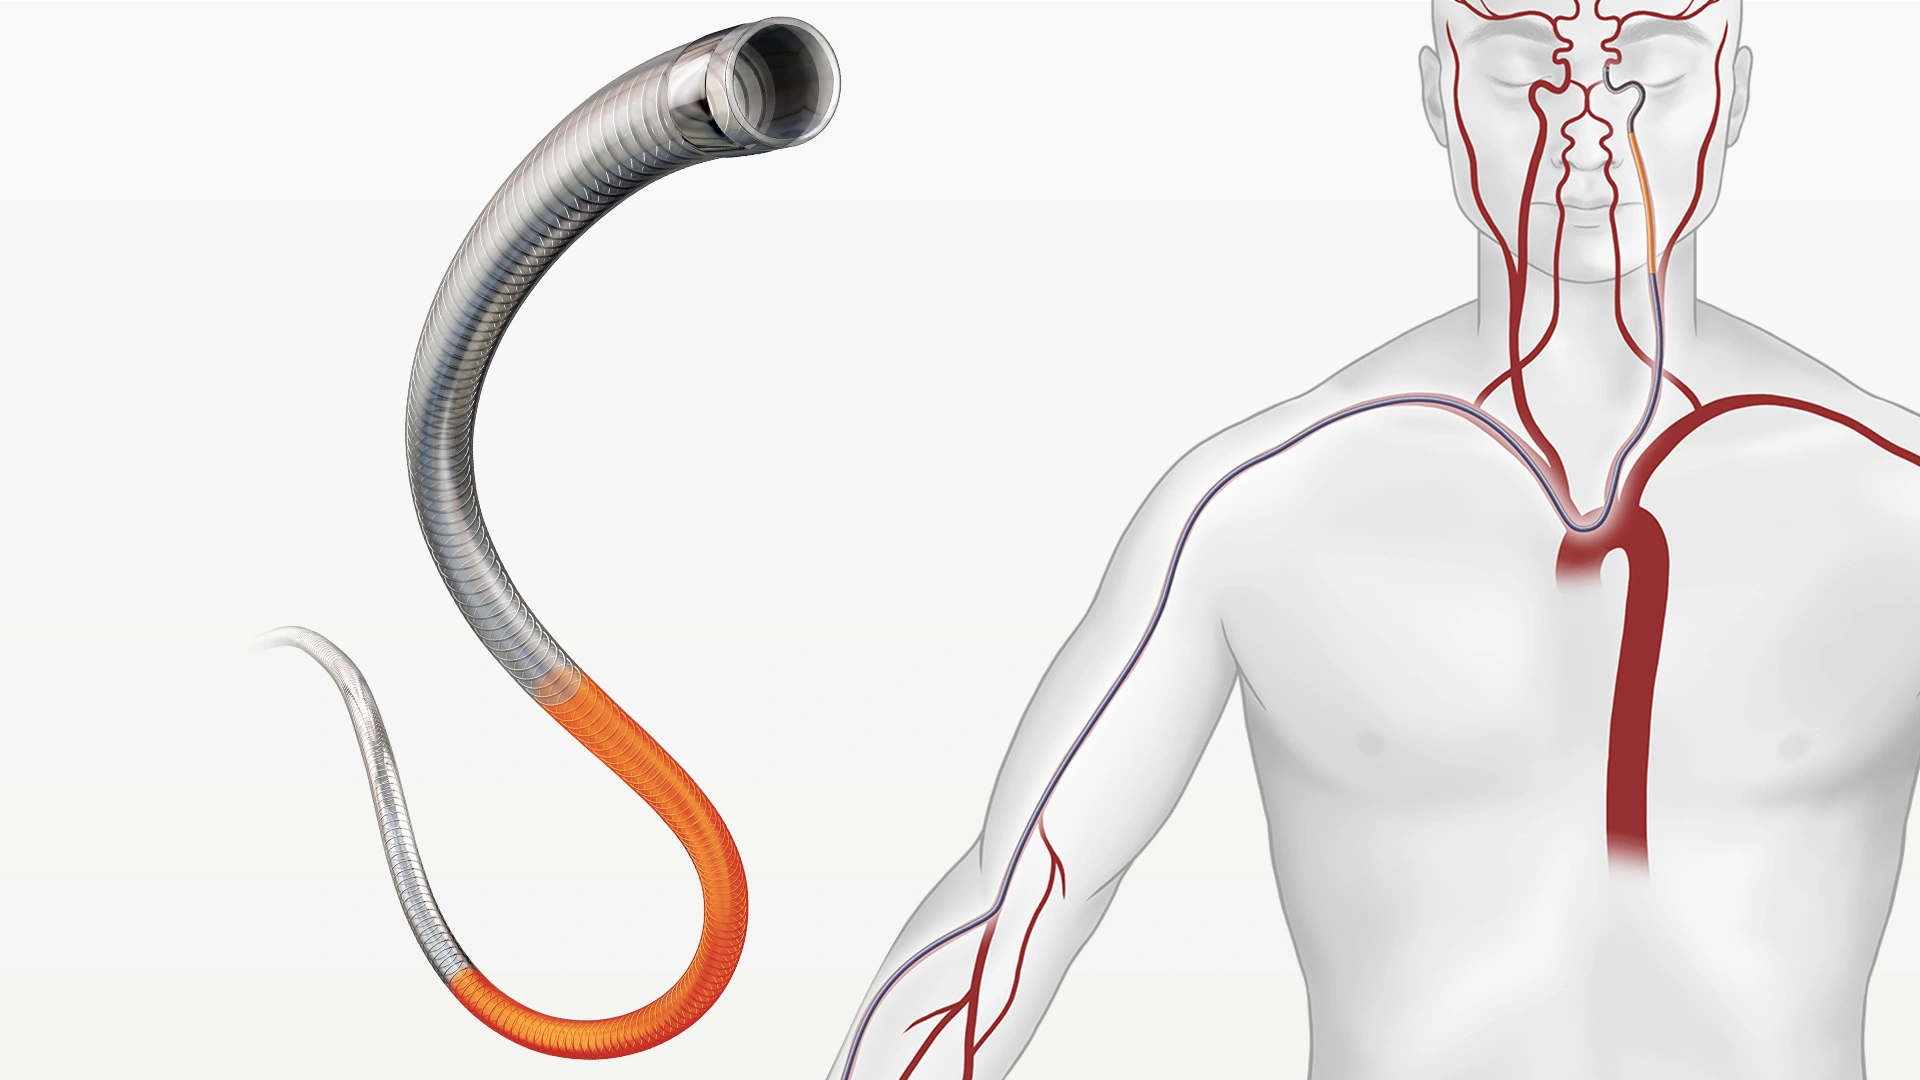 Illustration of the Tip of the BENCHMARK 071 Access Catheter for use in neurovascular access and an illustration of the map of arteries and veins it can access on a human